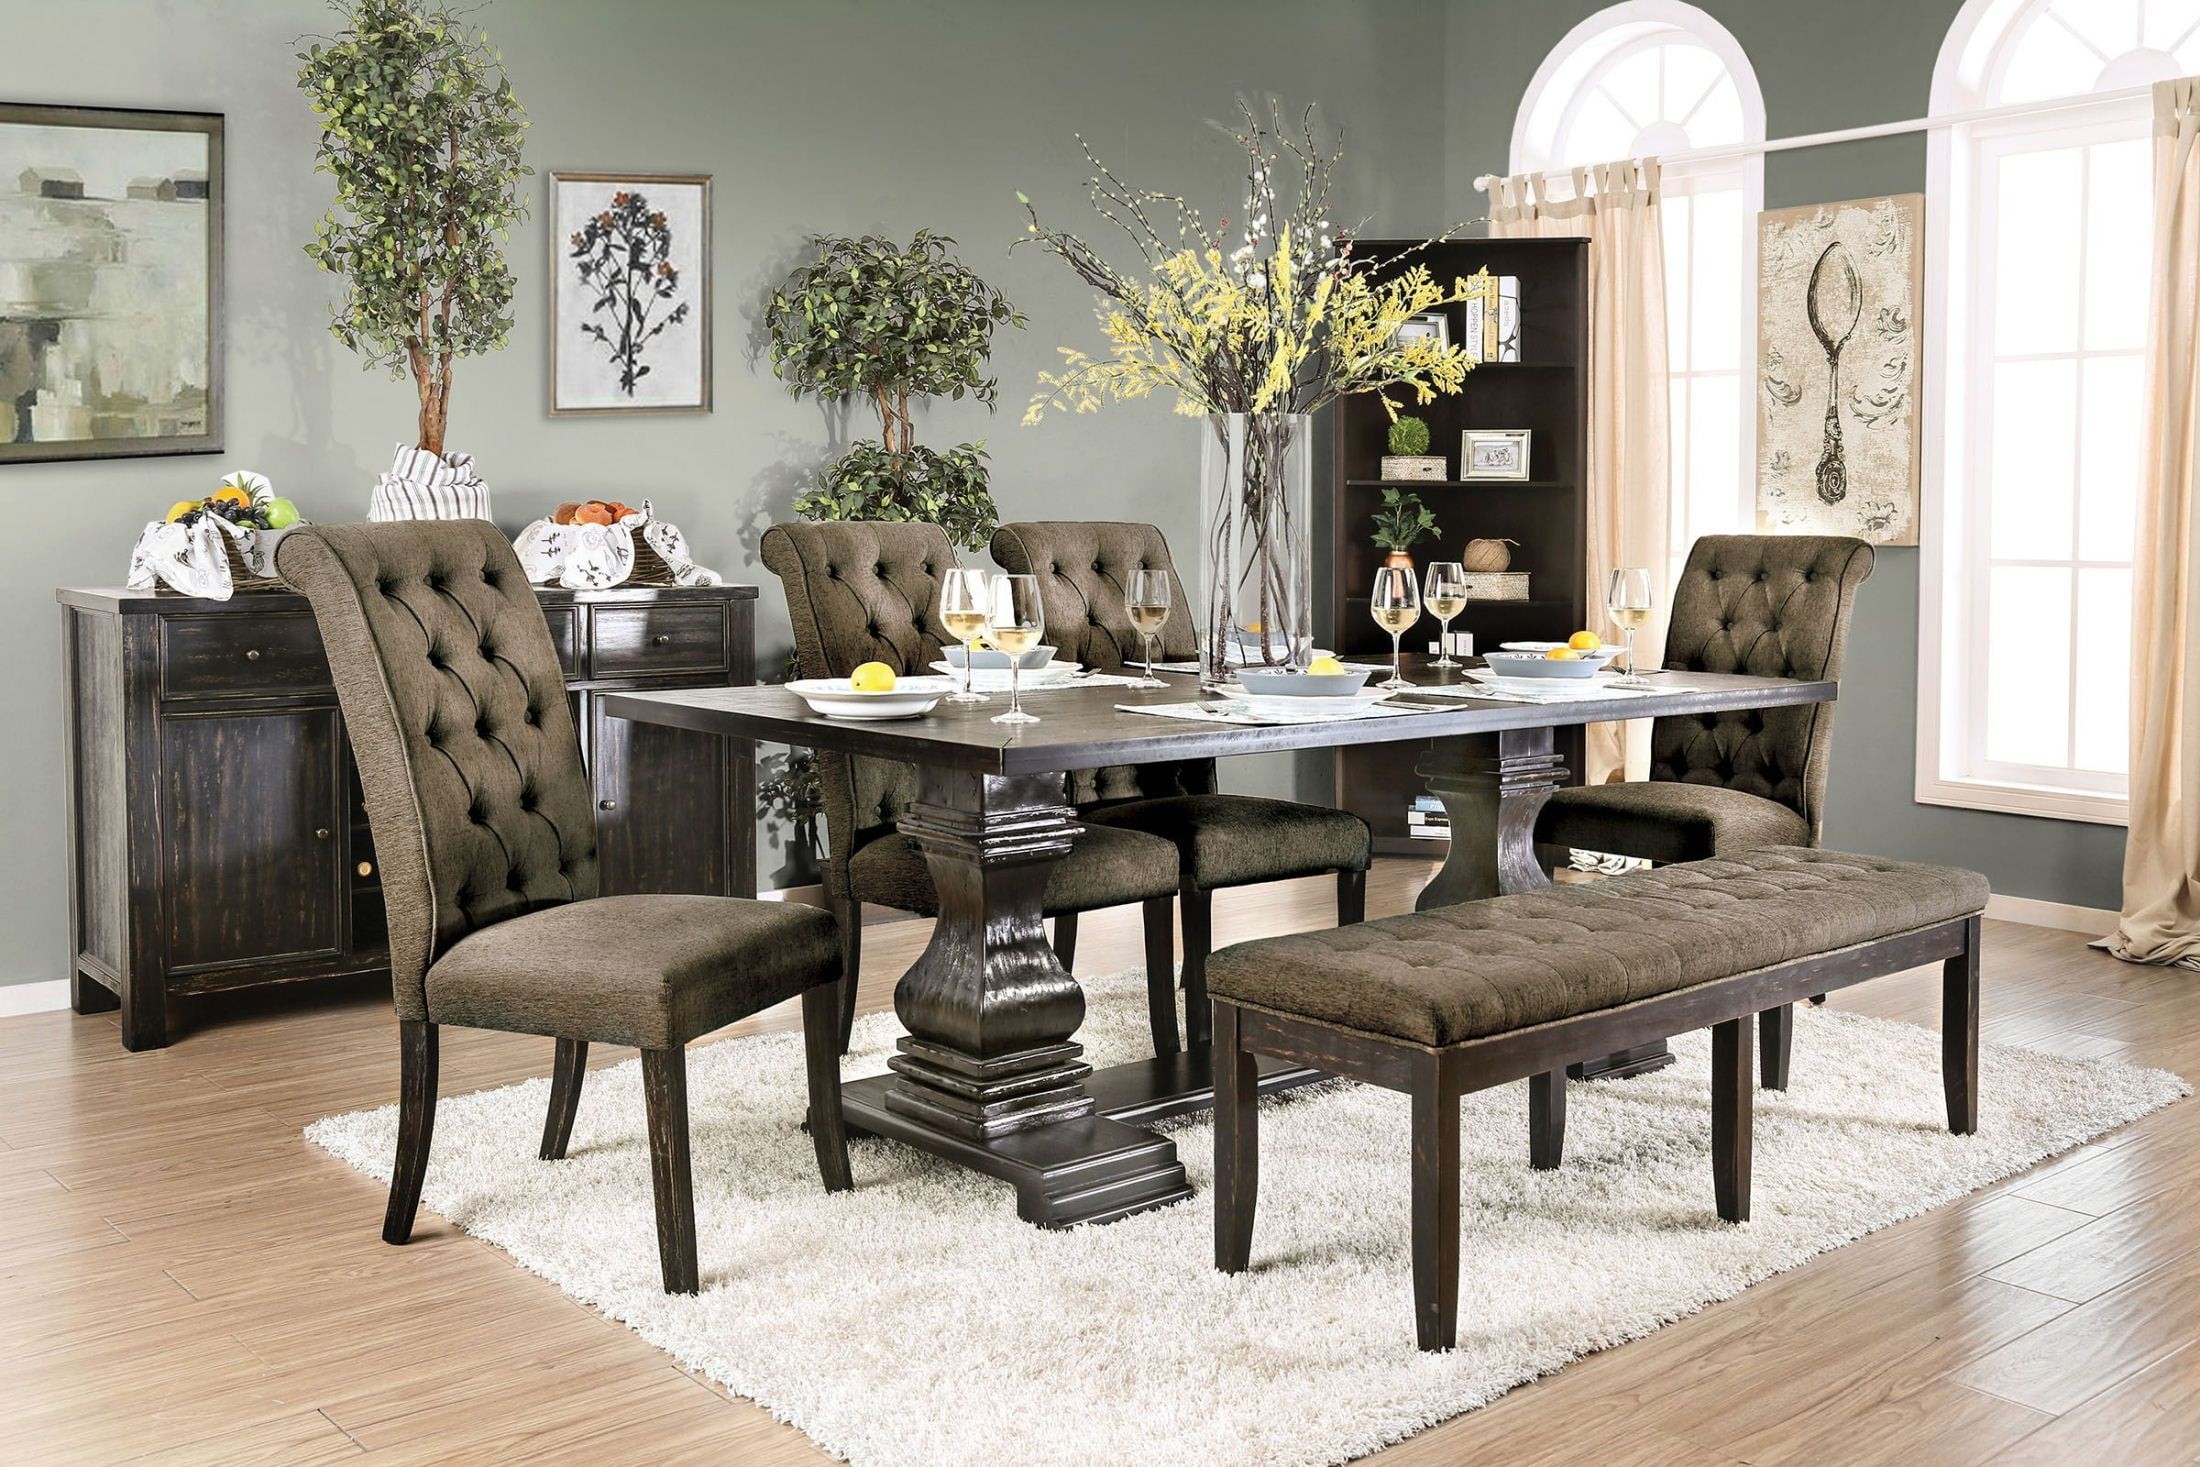 Creatice Black Dining Room Set for Large Space